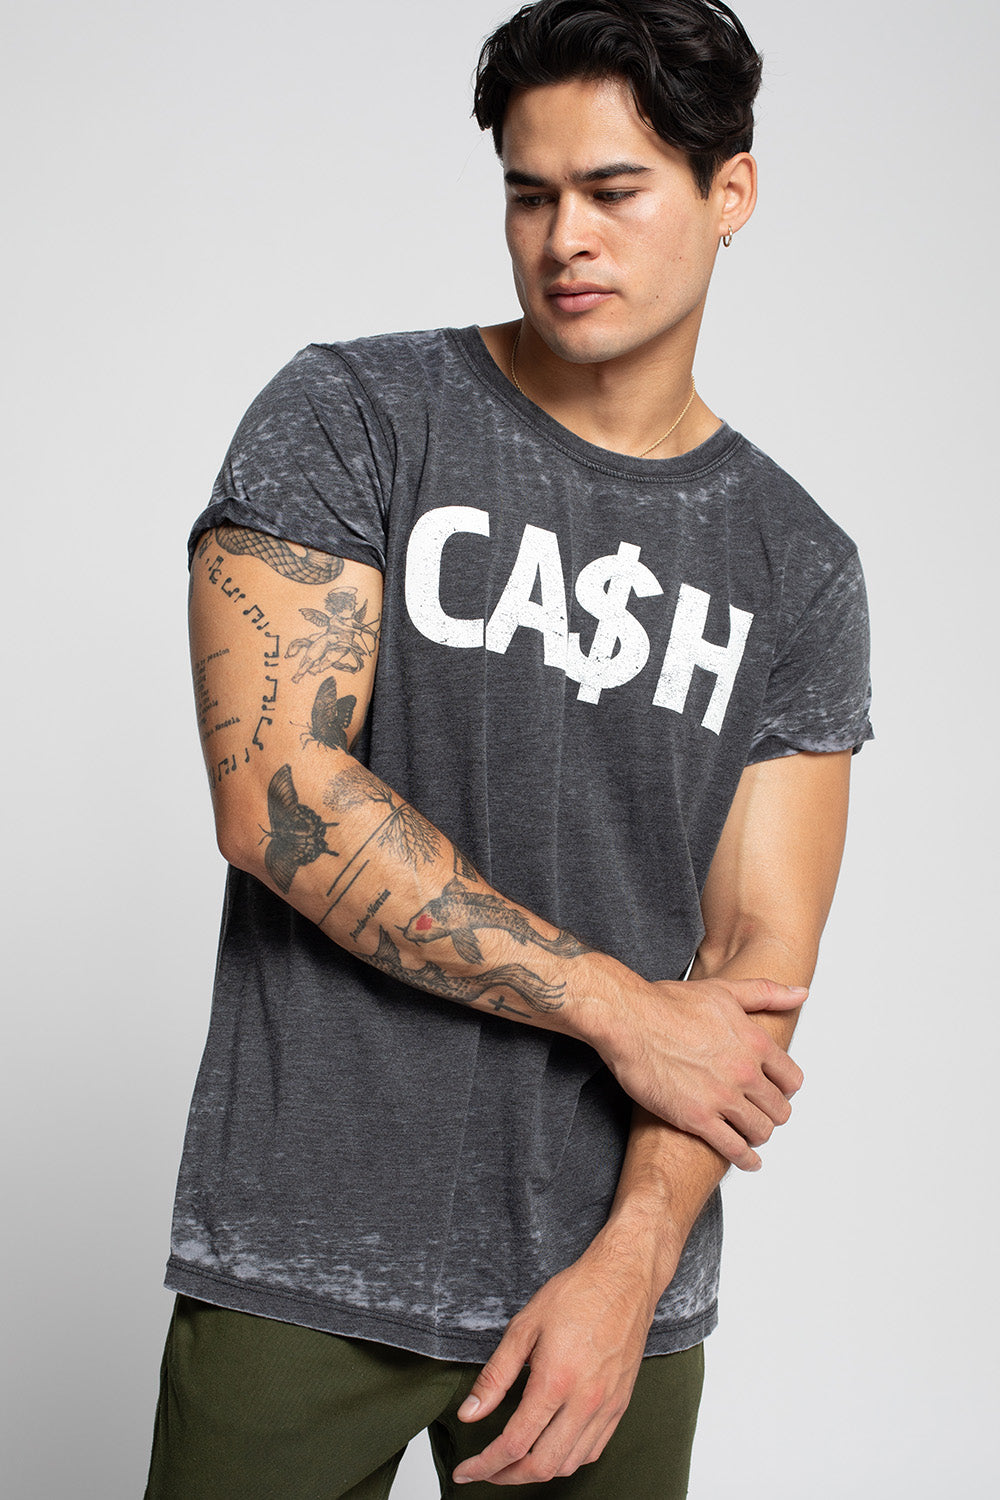 Cash Fitted Tee